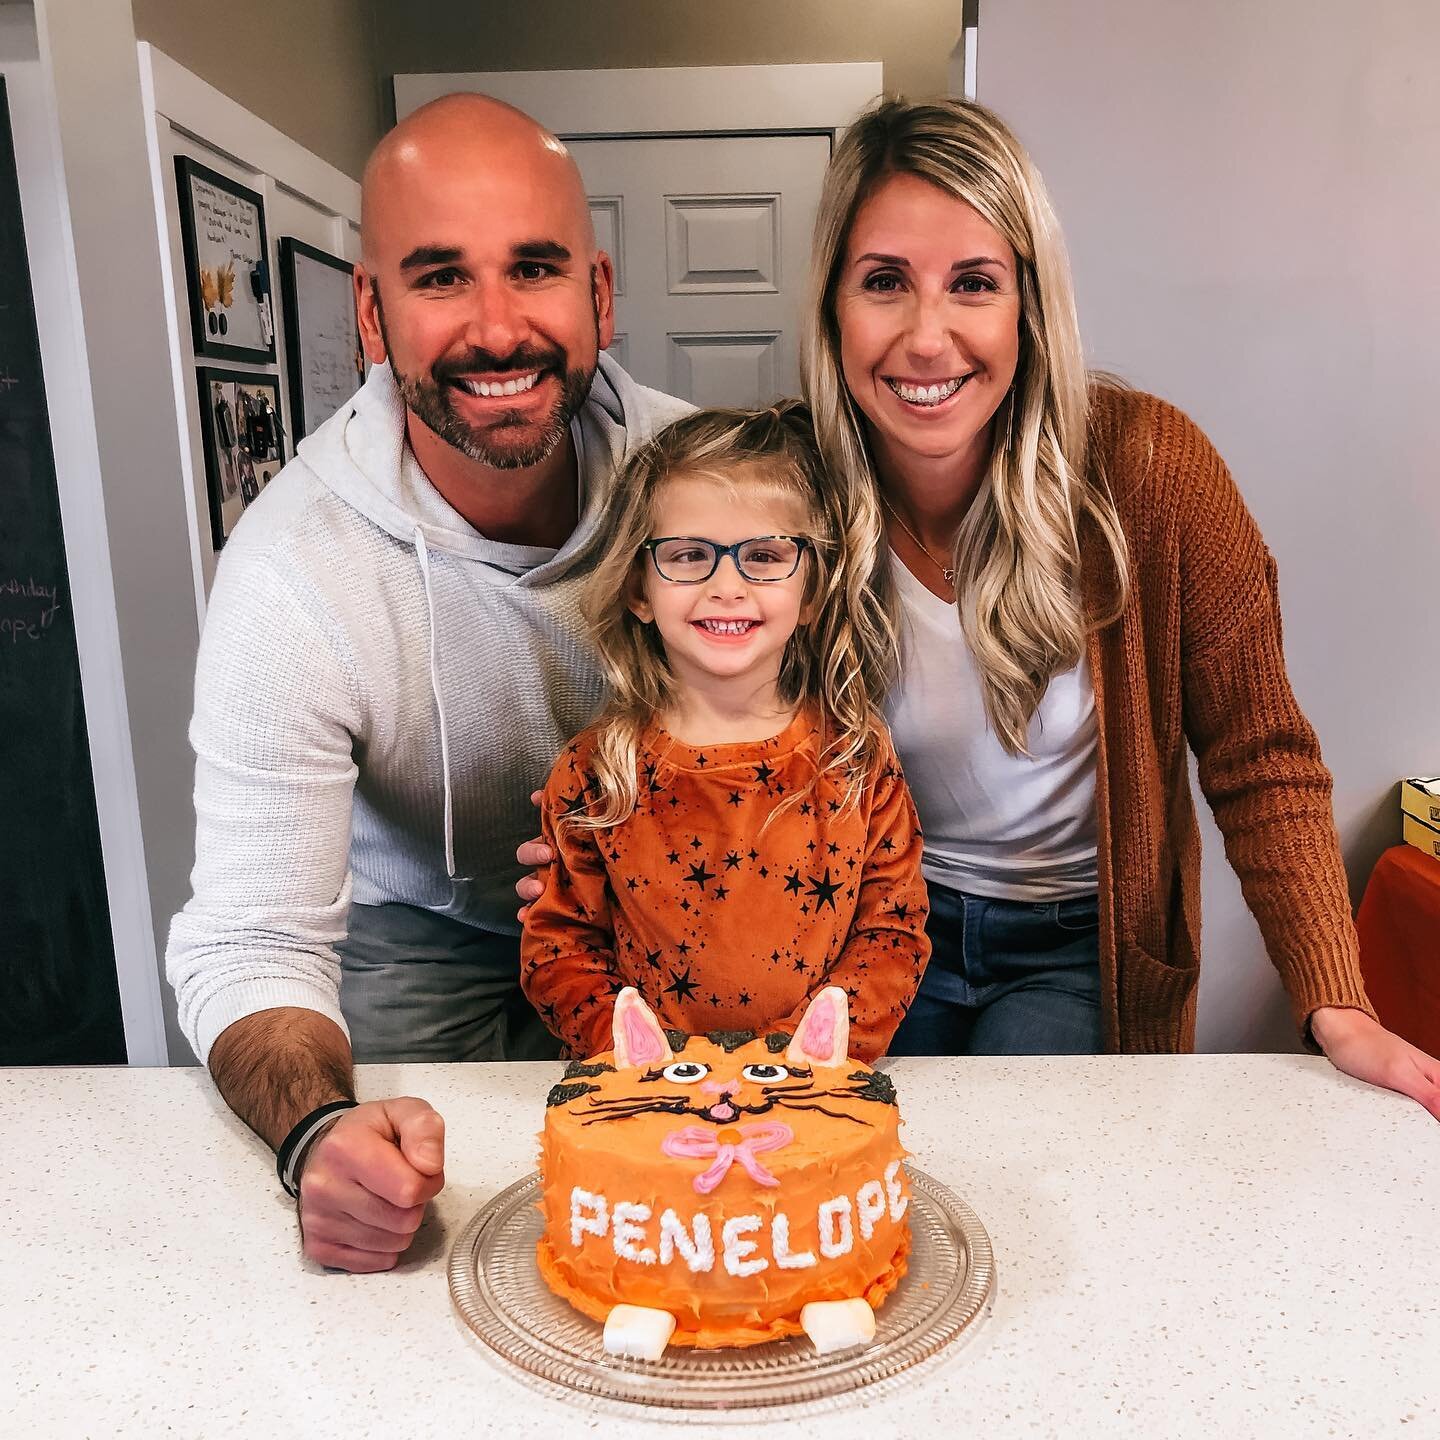 Happy 4th Birthday, Penelope Faye! 🎉 You are pure joy. The best shopping buddy, gardening partner, selfie taker, snuggler, and the biggest fan of the color orange. I hope the smallest things forever bring you joy and excitement and you continue to s